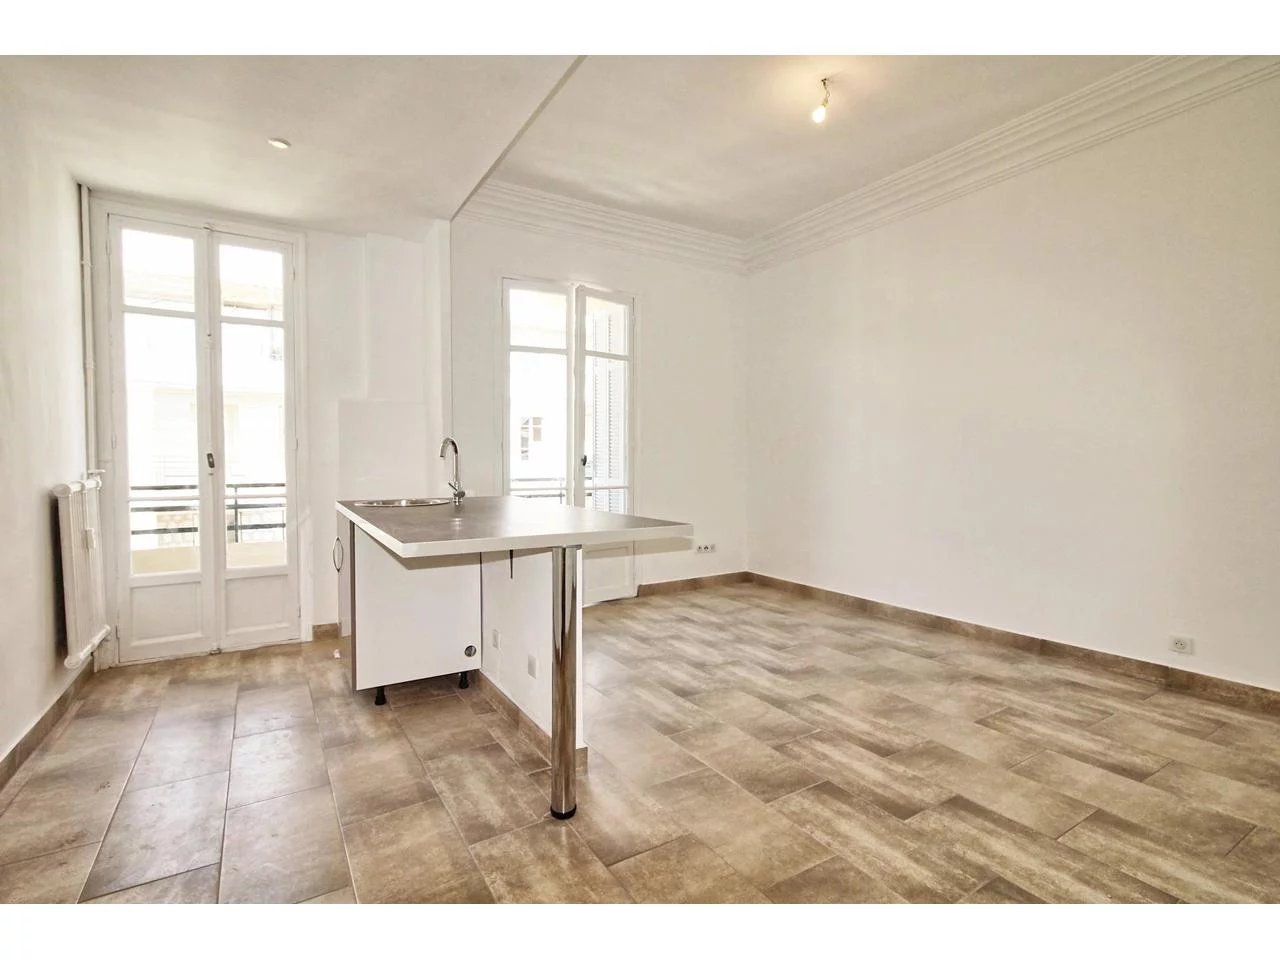 Appartement  1 Rooms 24.63m2  for sale   147 500 €